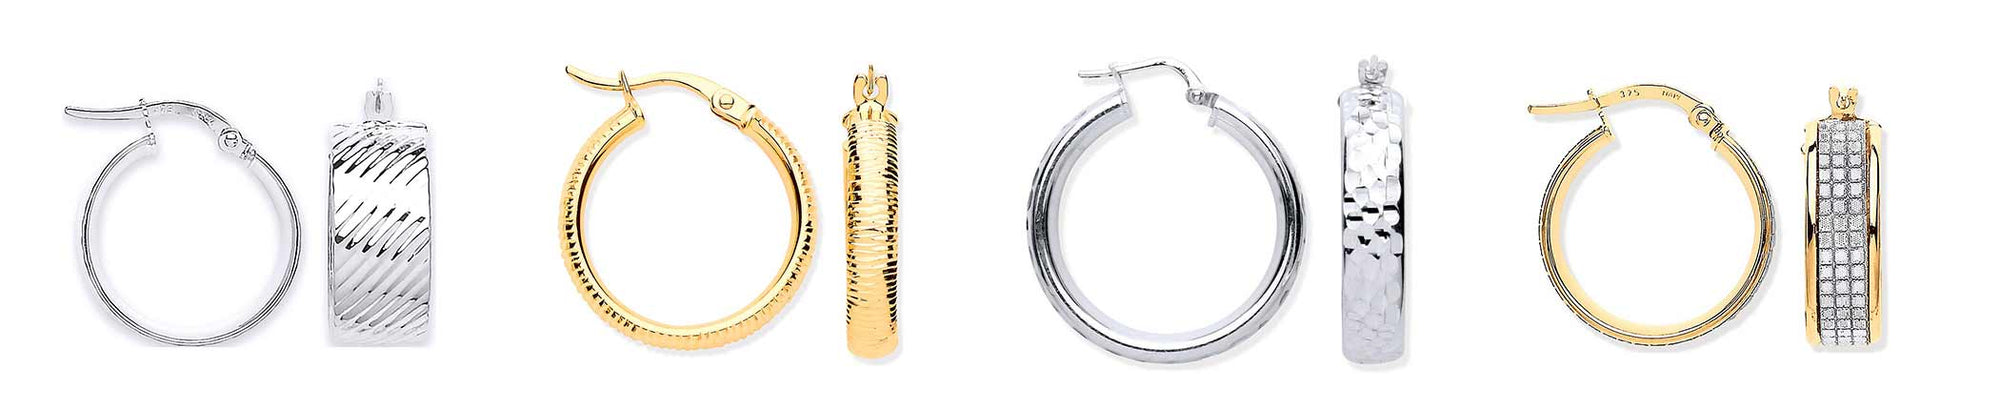 <font color=#000000>16 facts about hammered hoop earrings; FAQ's</font>